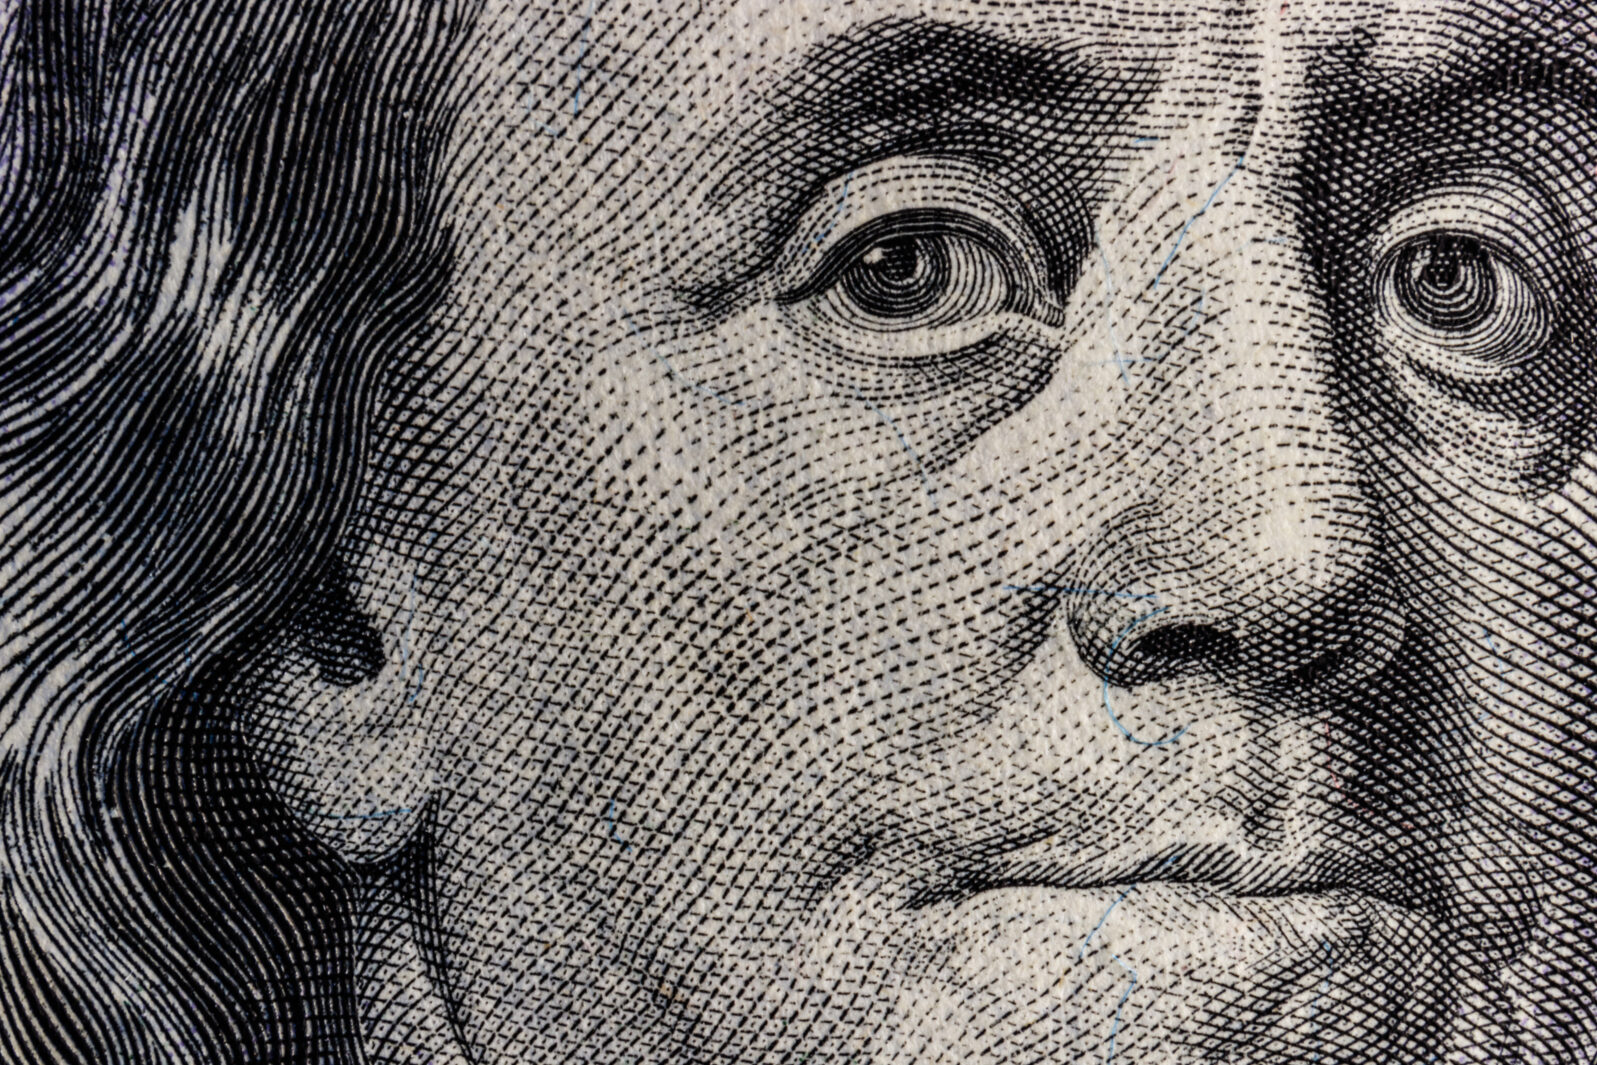 Closeup of Ben Franklin on a one hundred dollar bill for background IV